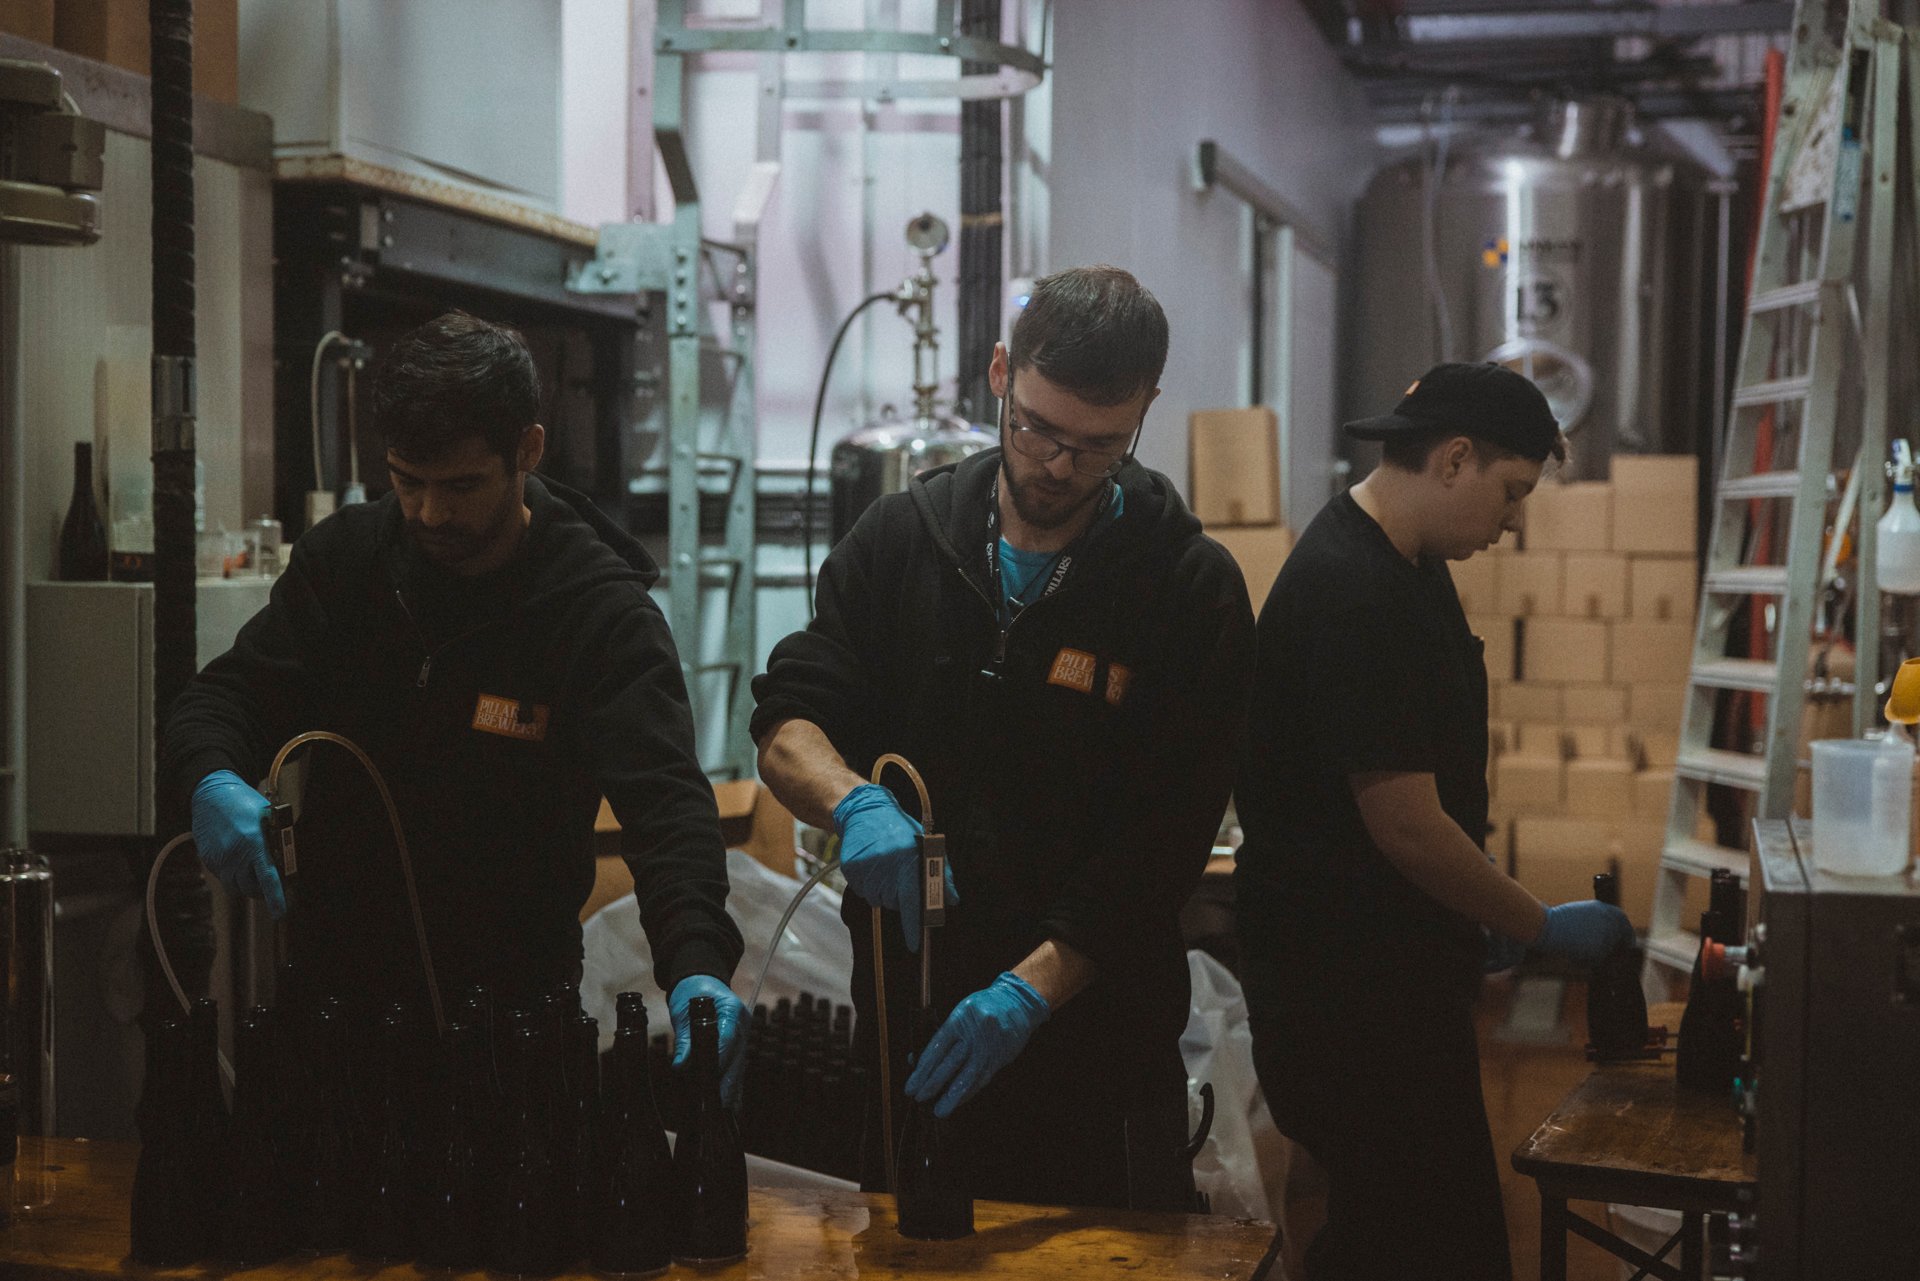 The Icebock Experience: The UK’s First Eisbock